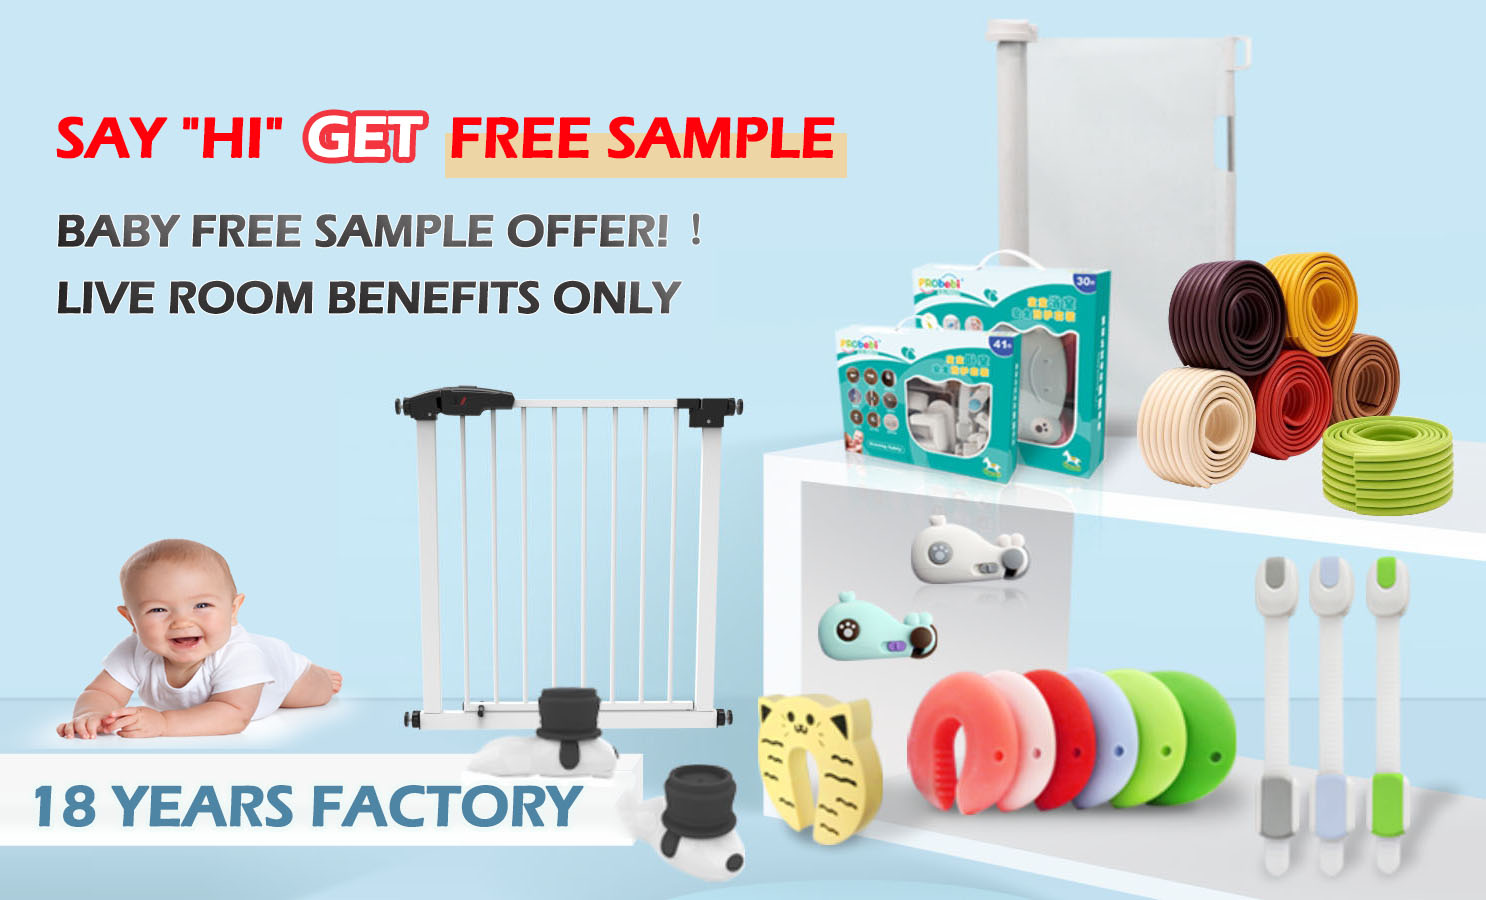 Get free baby sample, benefit only on live room